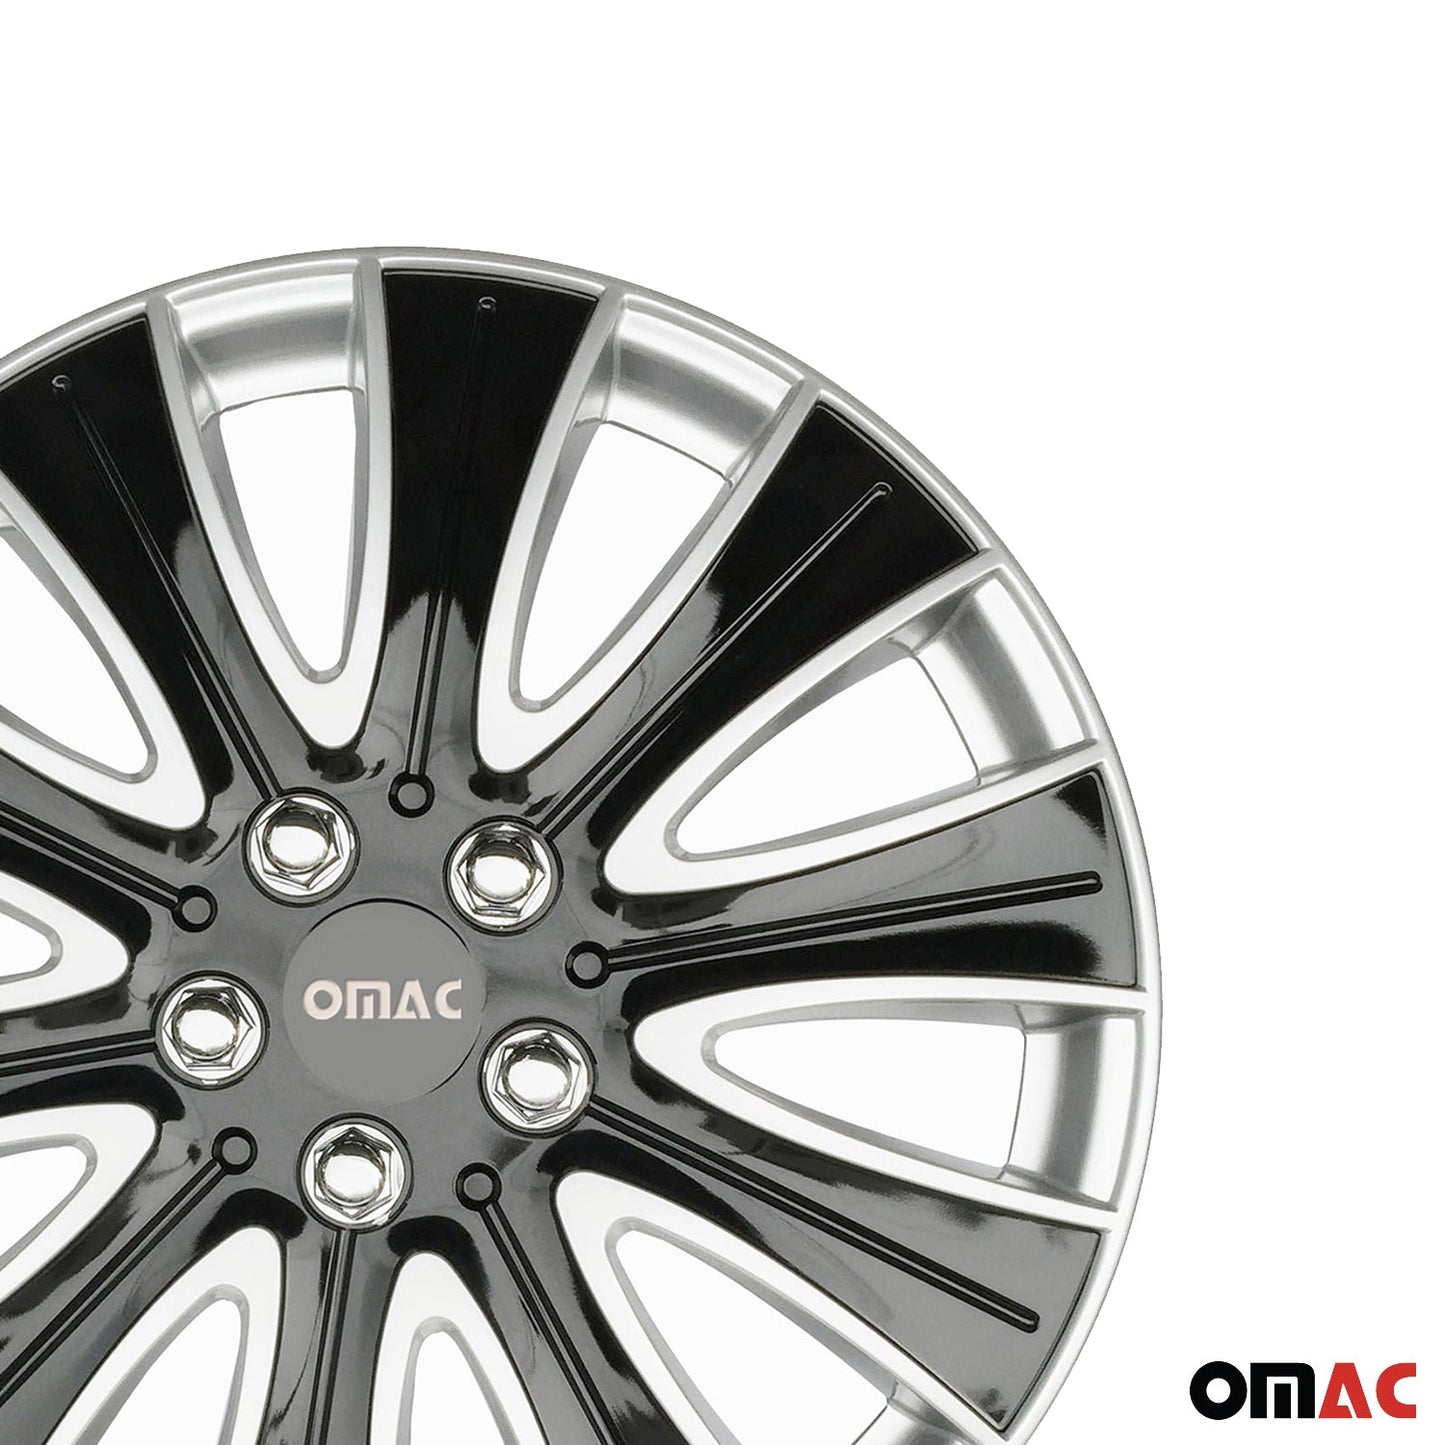 OMAC 16" Wheel Covers Guard Hub Caps Durable Snap On ABS Accessories Black Silver 4x OMAC-WE40-SVBK16